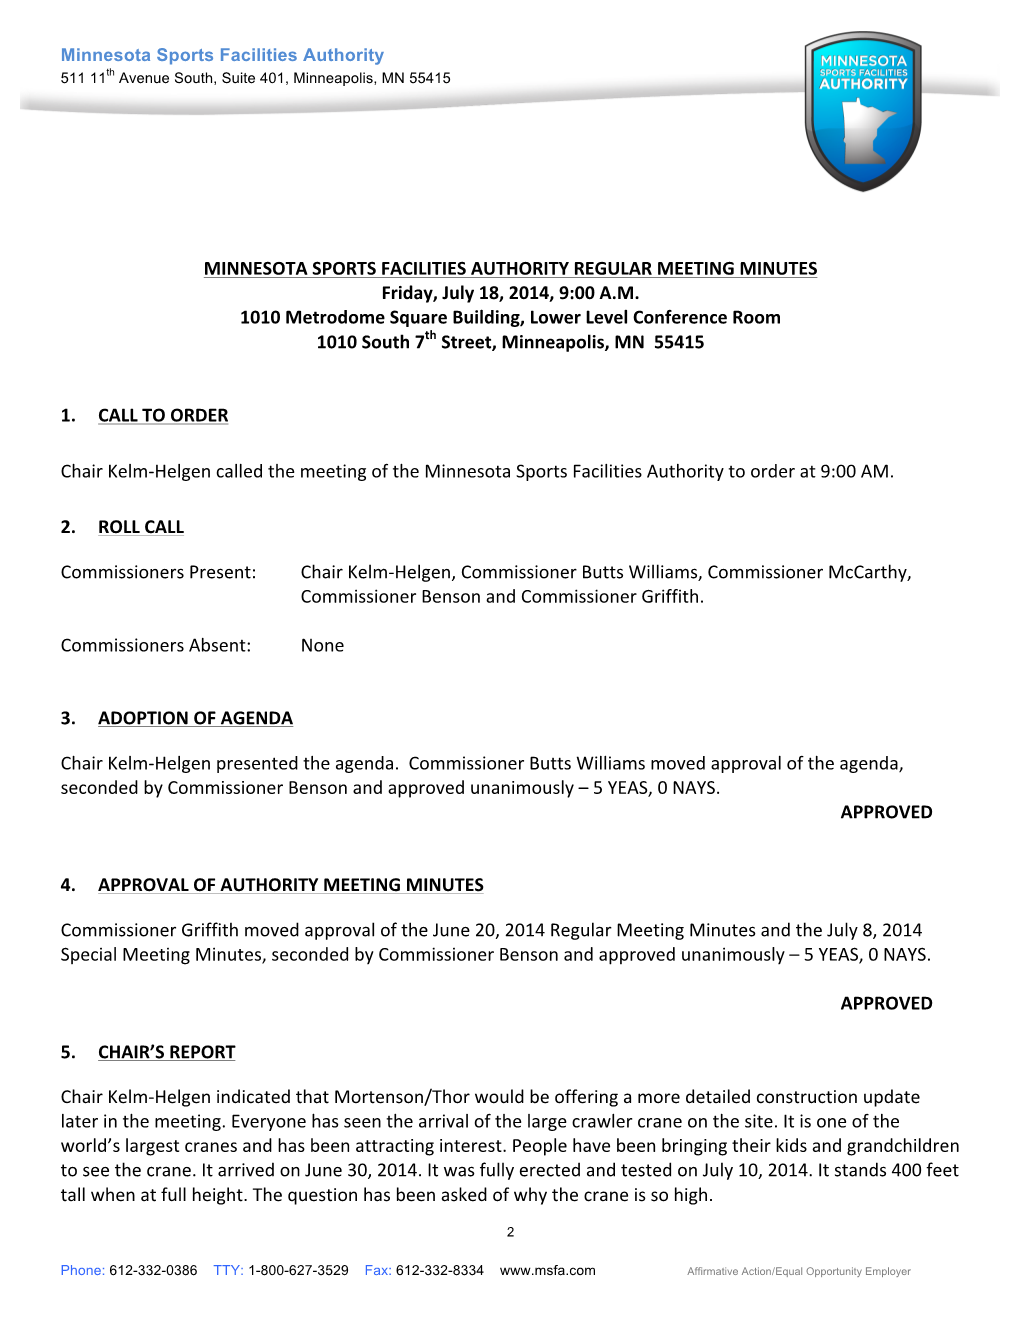 MINNESOTA SPORTS FACILITIES AUTHORITY REGULAR MEETING MINUTES Friday, July 18, 2014, 9:00 A.M